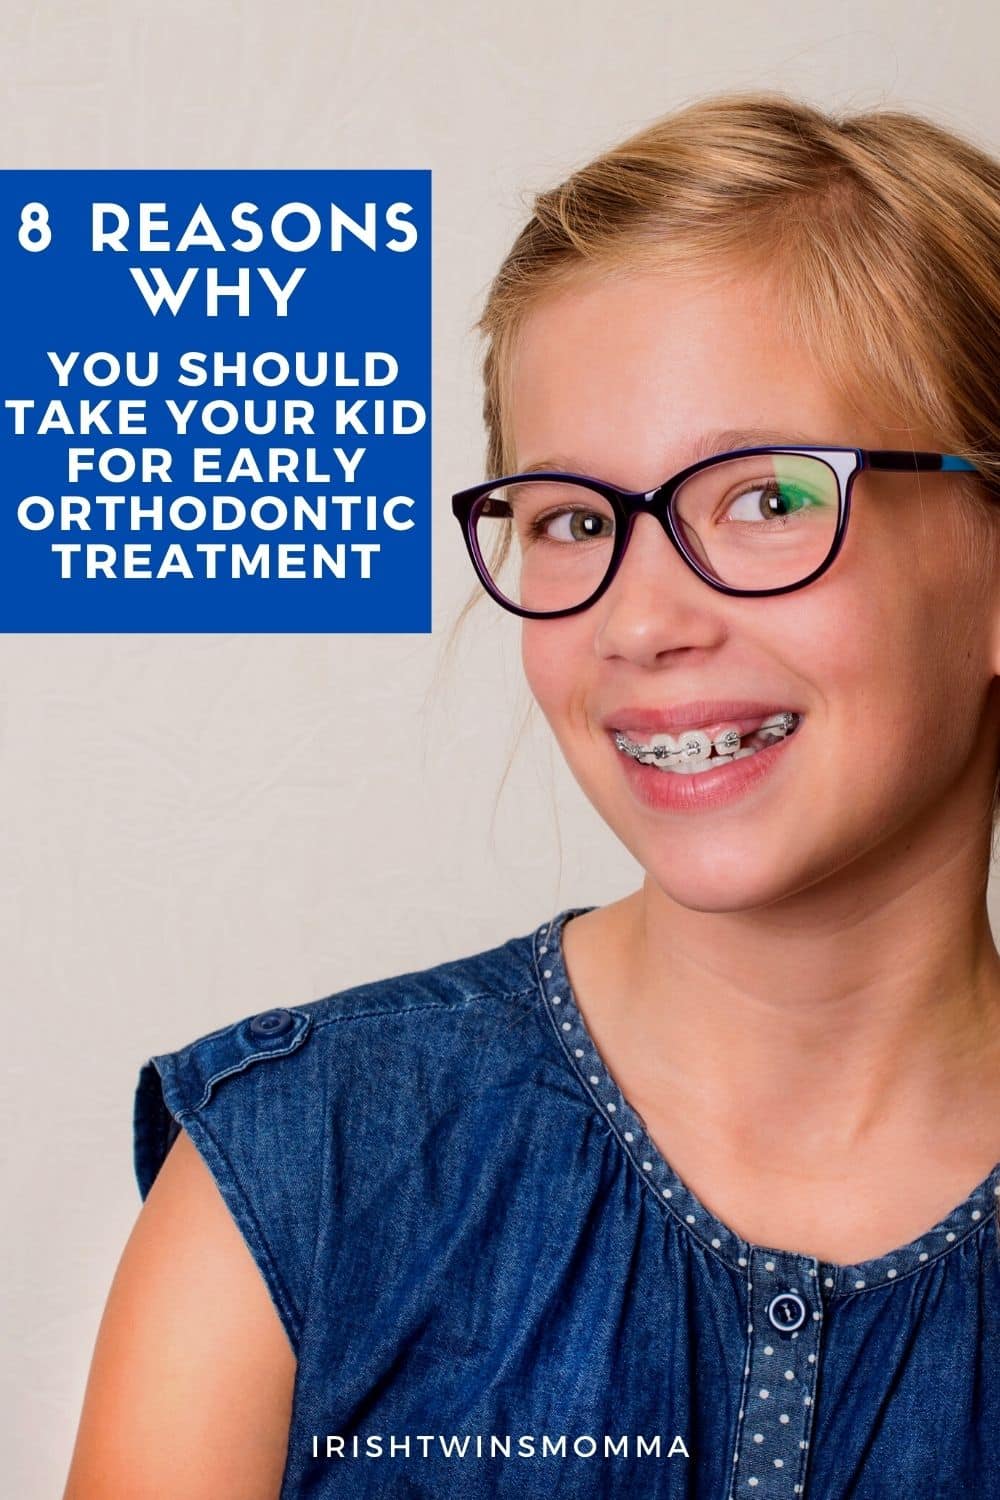 8 Reasons Why You Should Take Your Kid for Early Orthodontic Treatment